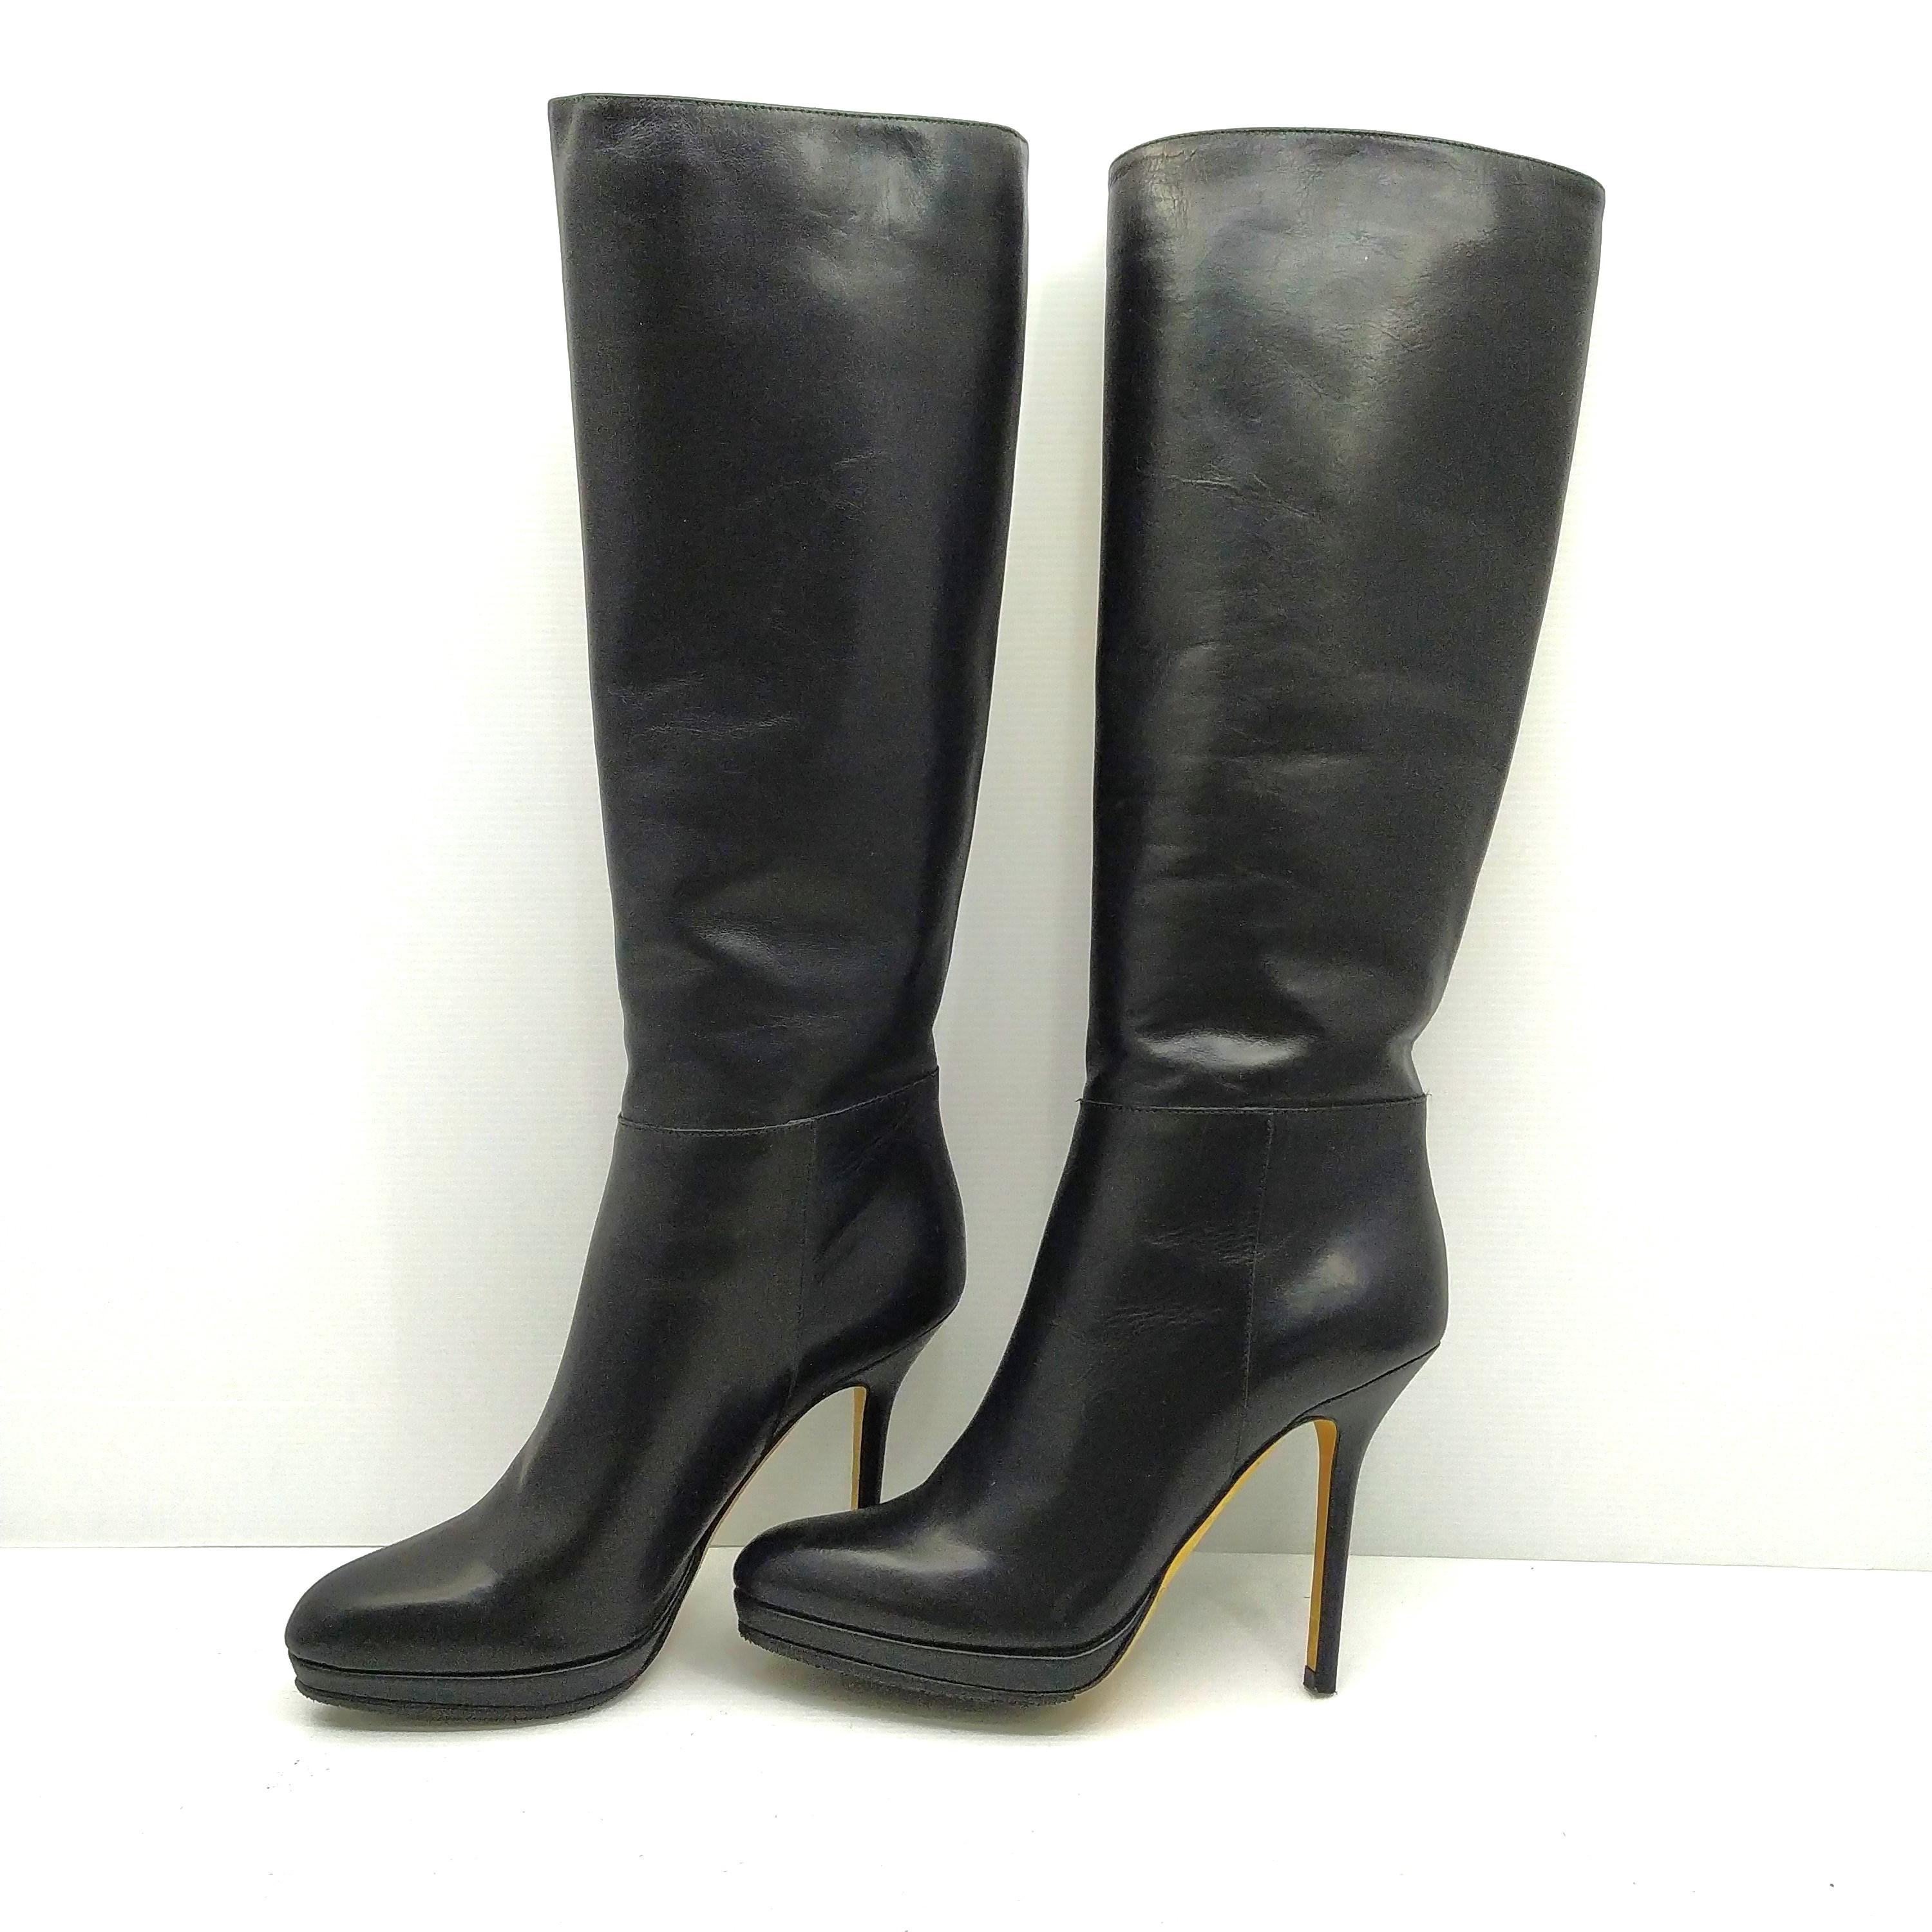 Discounted) Jimmy Choo Long Boots 